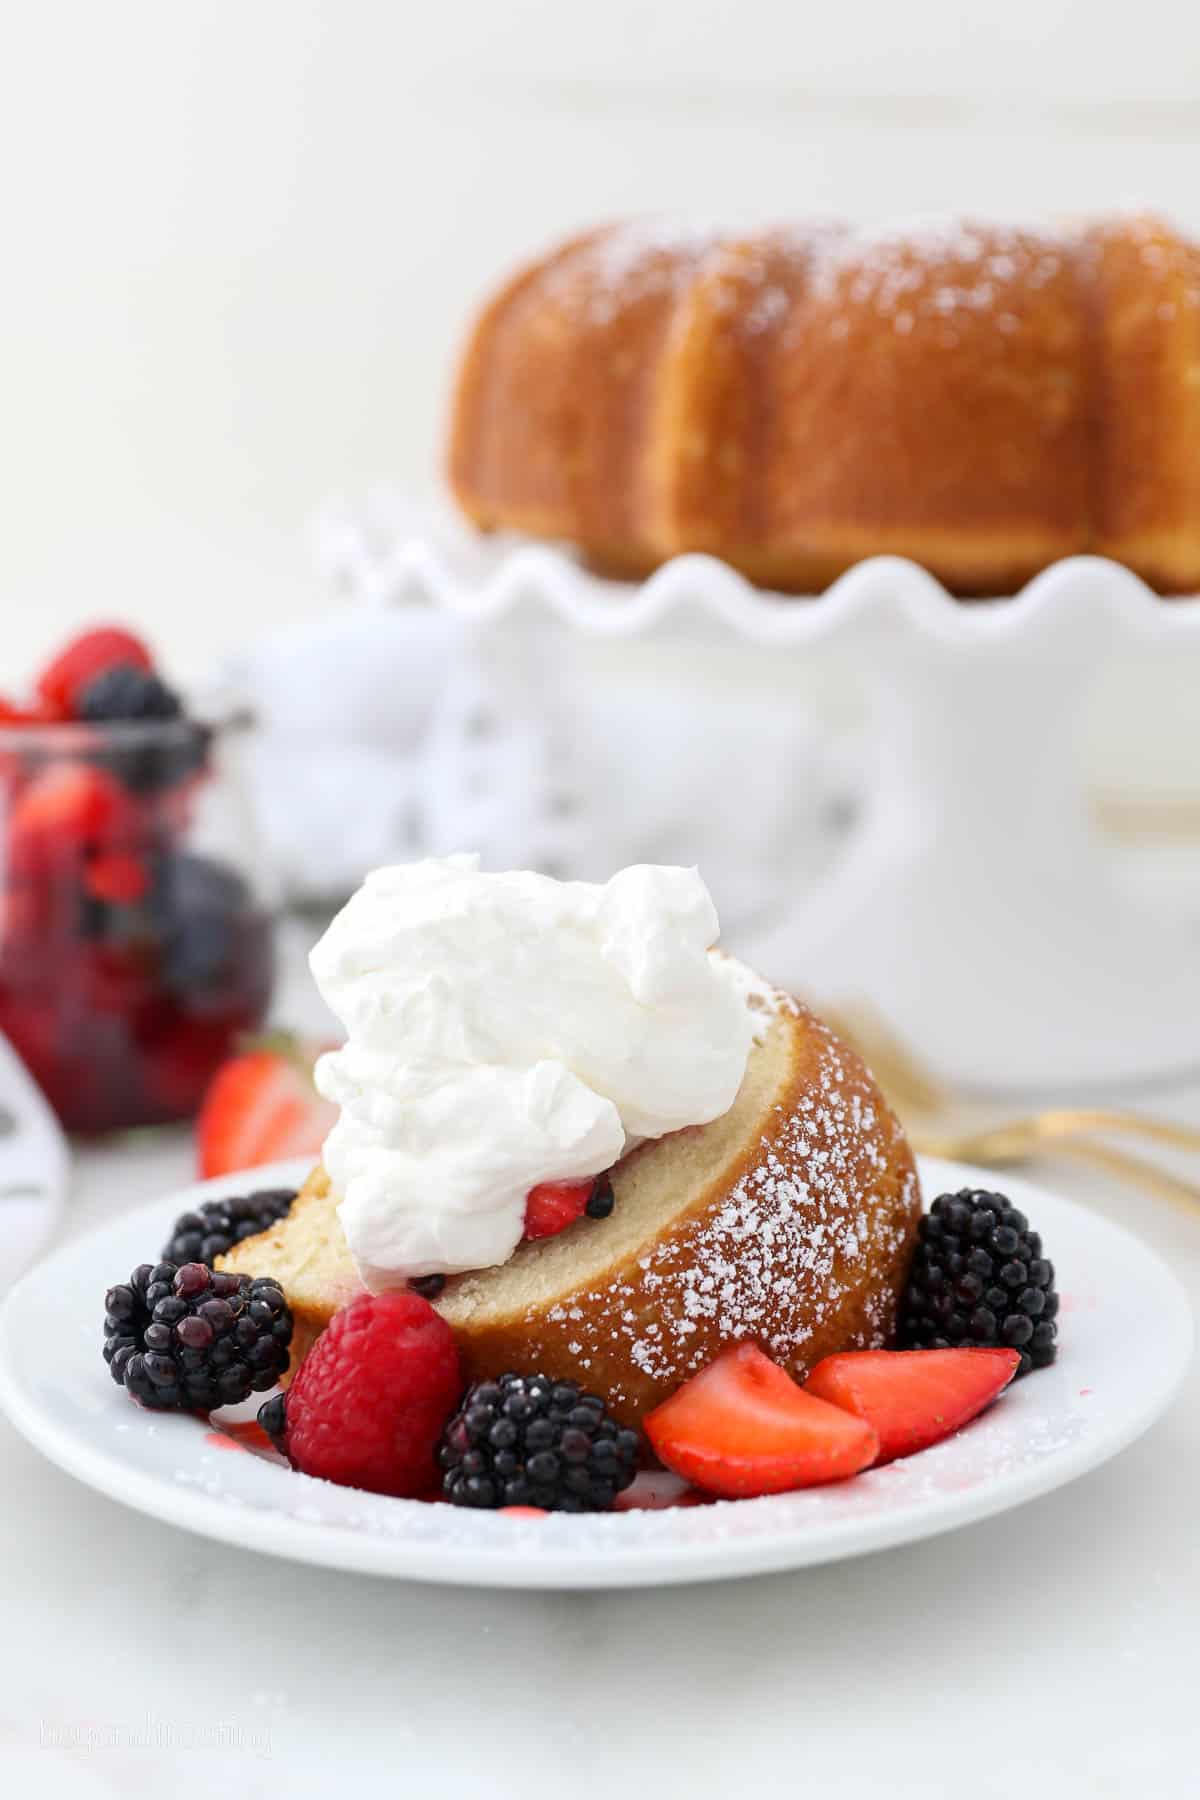 A slice of vanilla bundt cake on a white plate, surrounded by macerated mixed berries and topped with whipped cream, with the rest of the cake on a cake stand in the background.